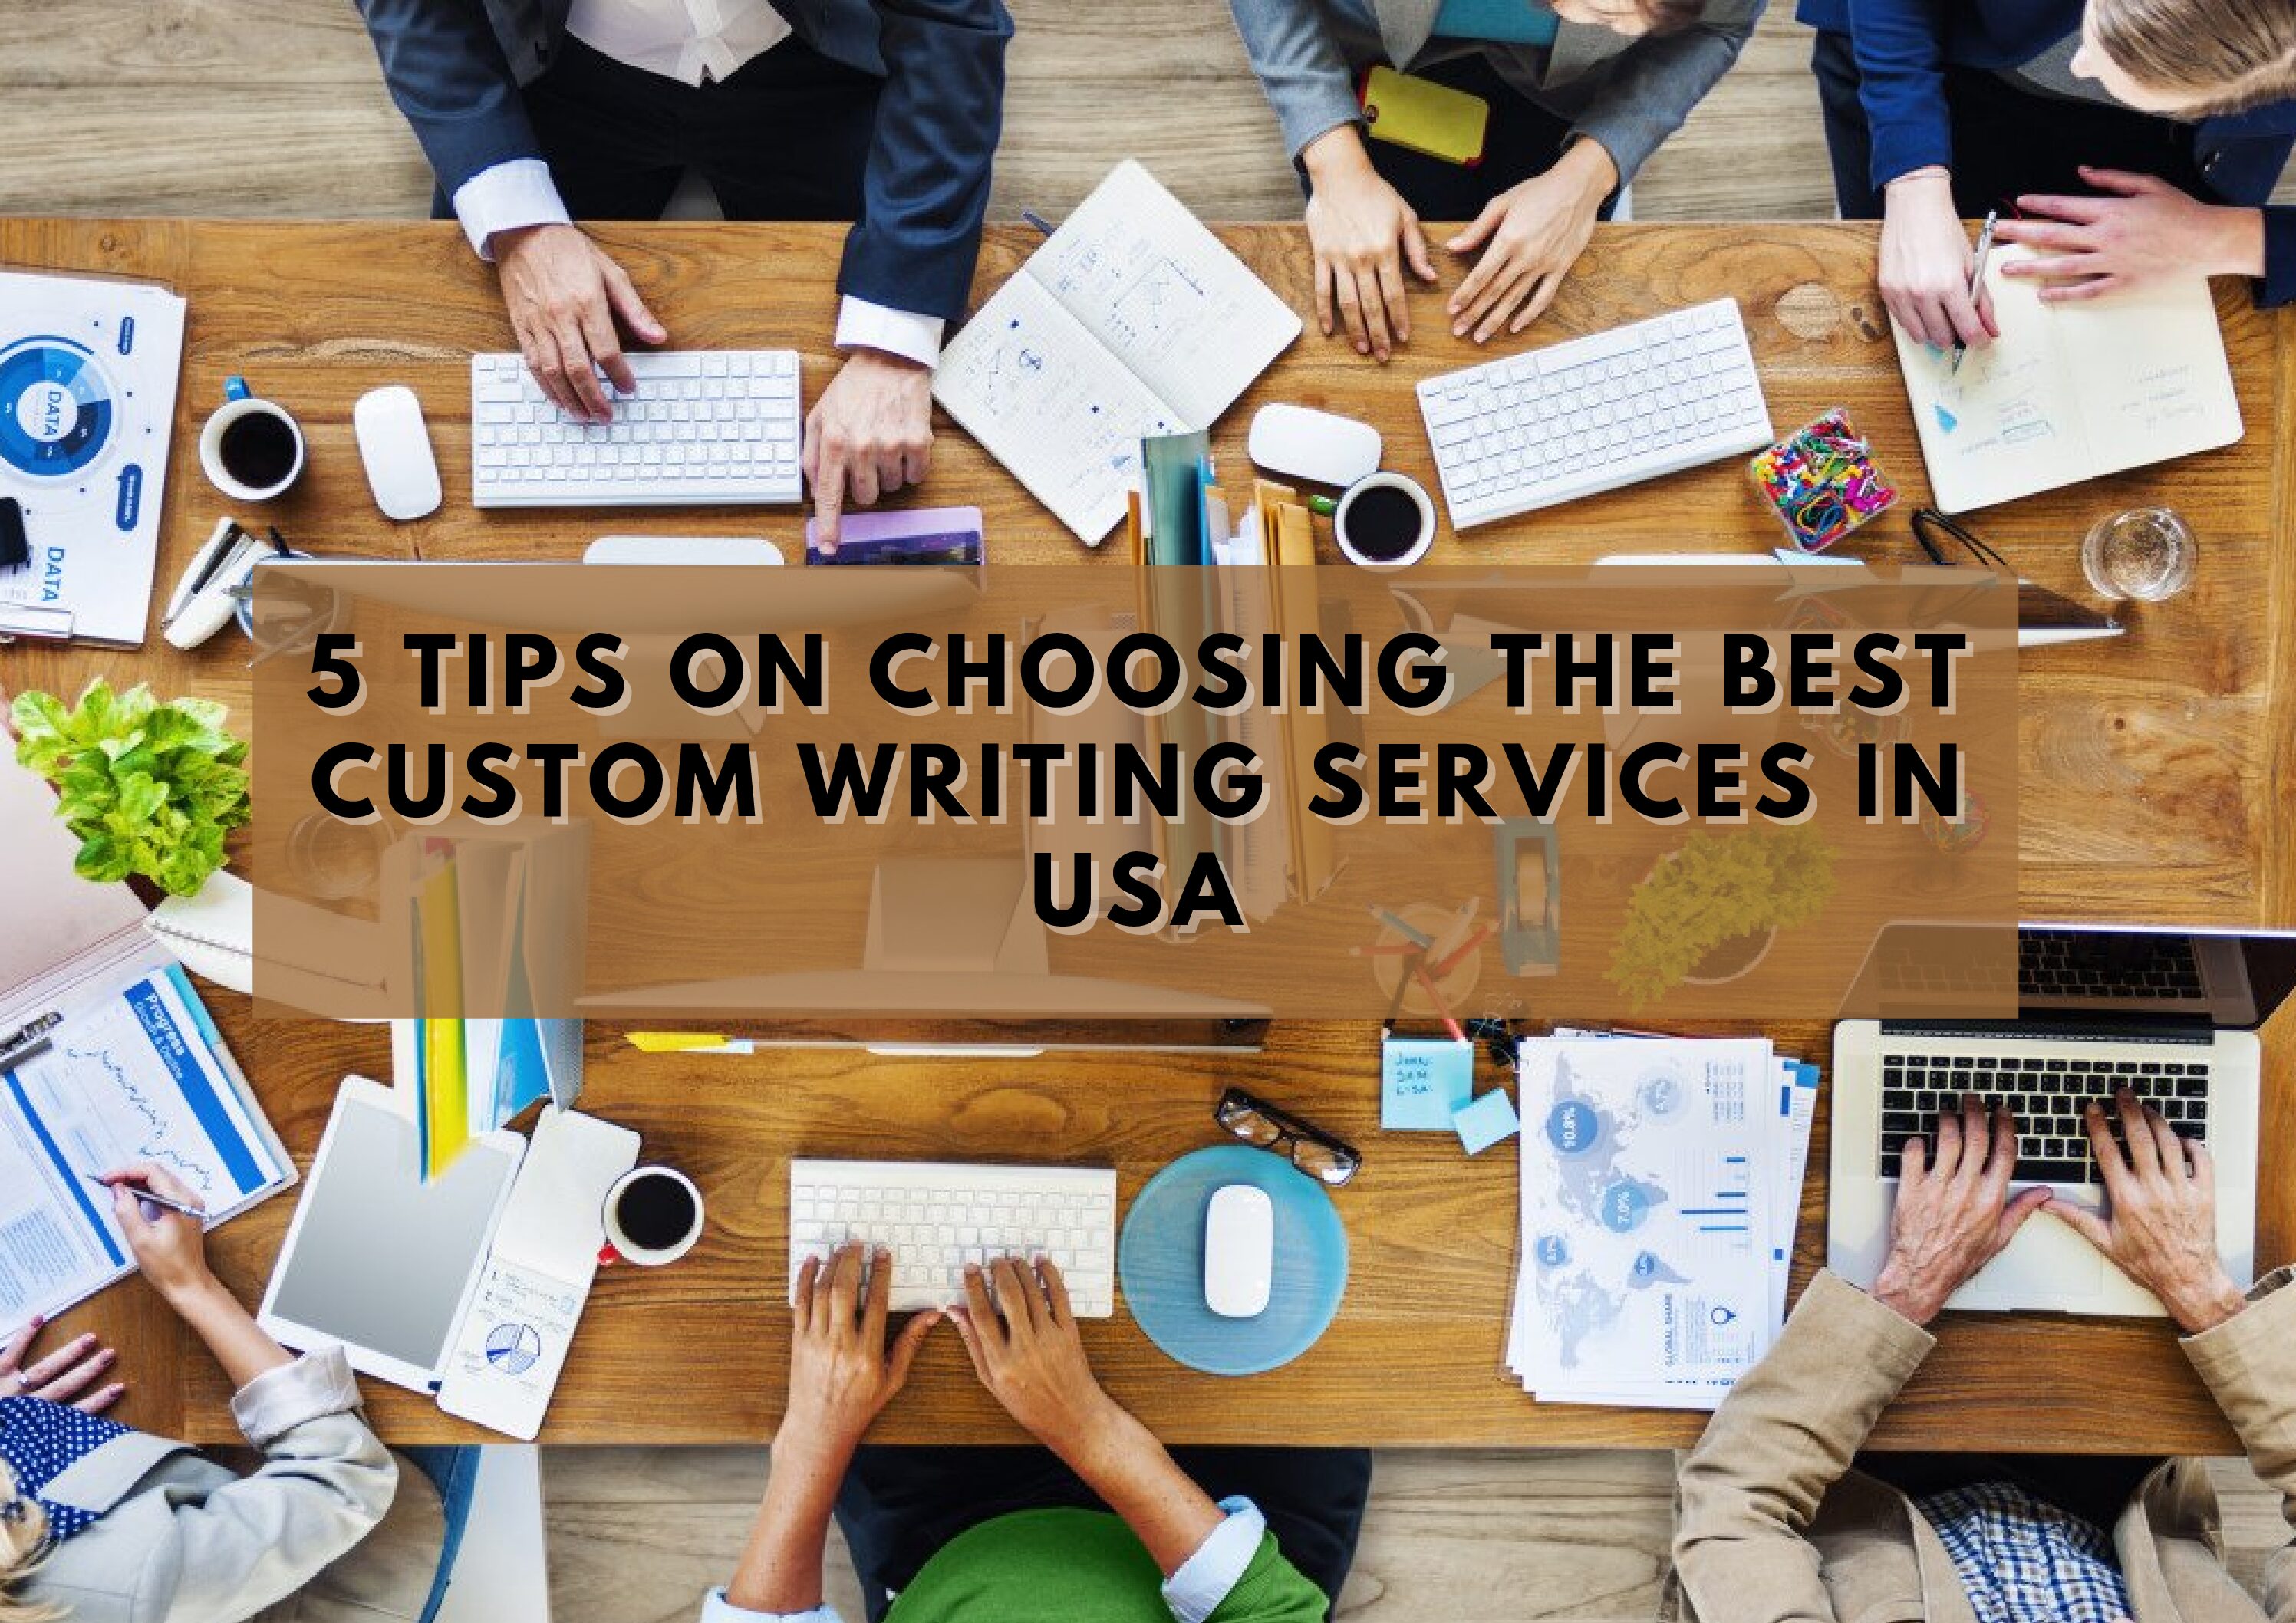 5 Tips on Choosing the Best Custom Writing Services in USA